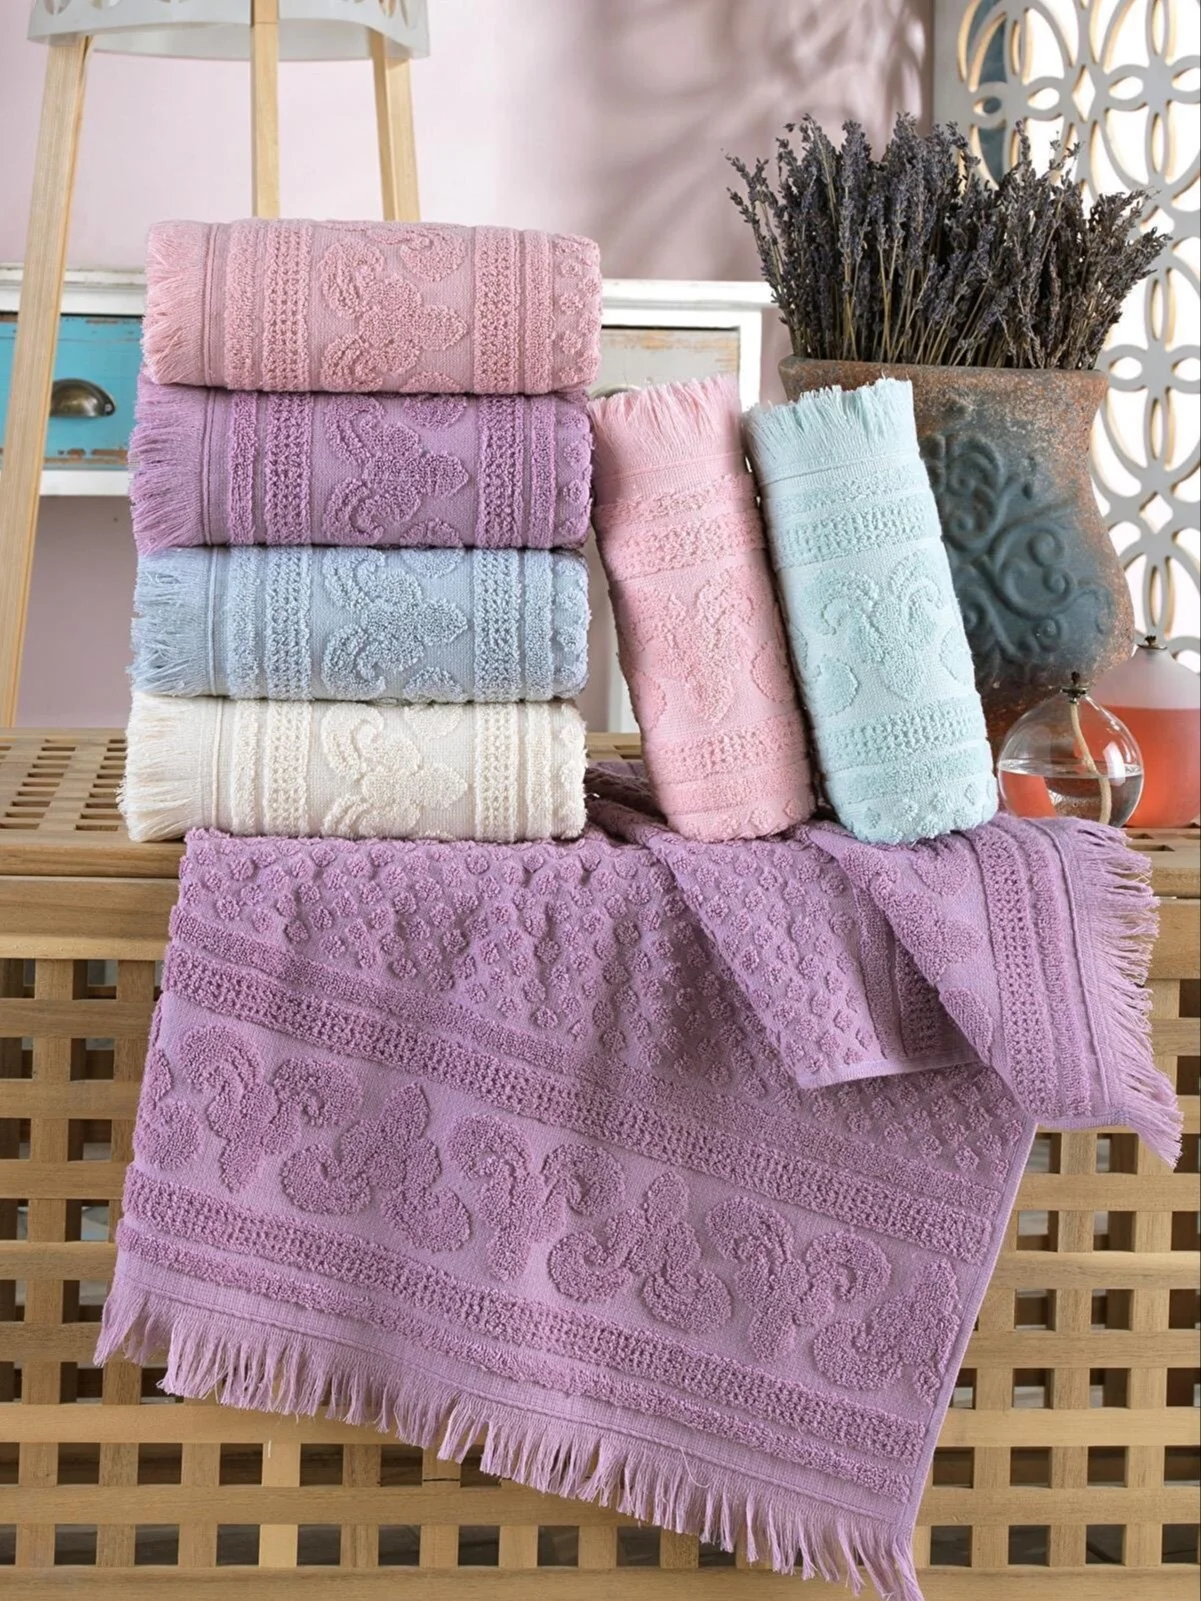 

6 Pcs Bath Hand Face Hair Towel Set 50x90 Cm %100 Cotton Colorful High Quality Quick Dry Soft Great Absorbent 2023